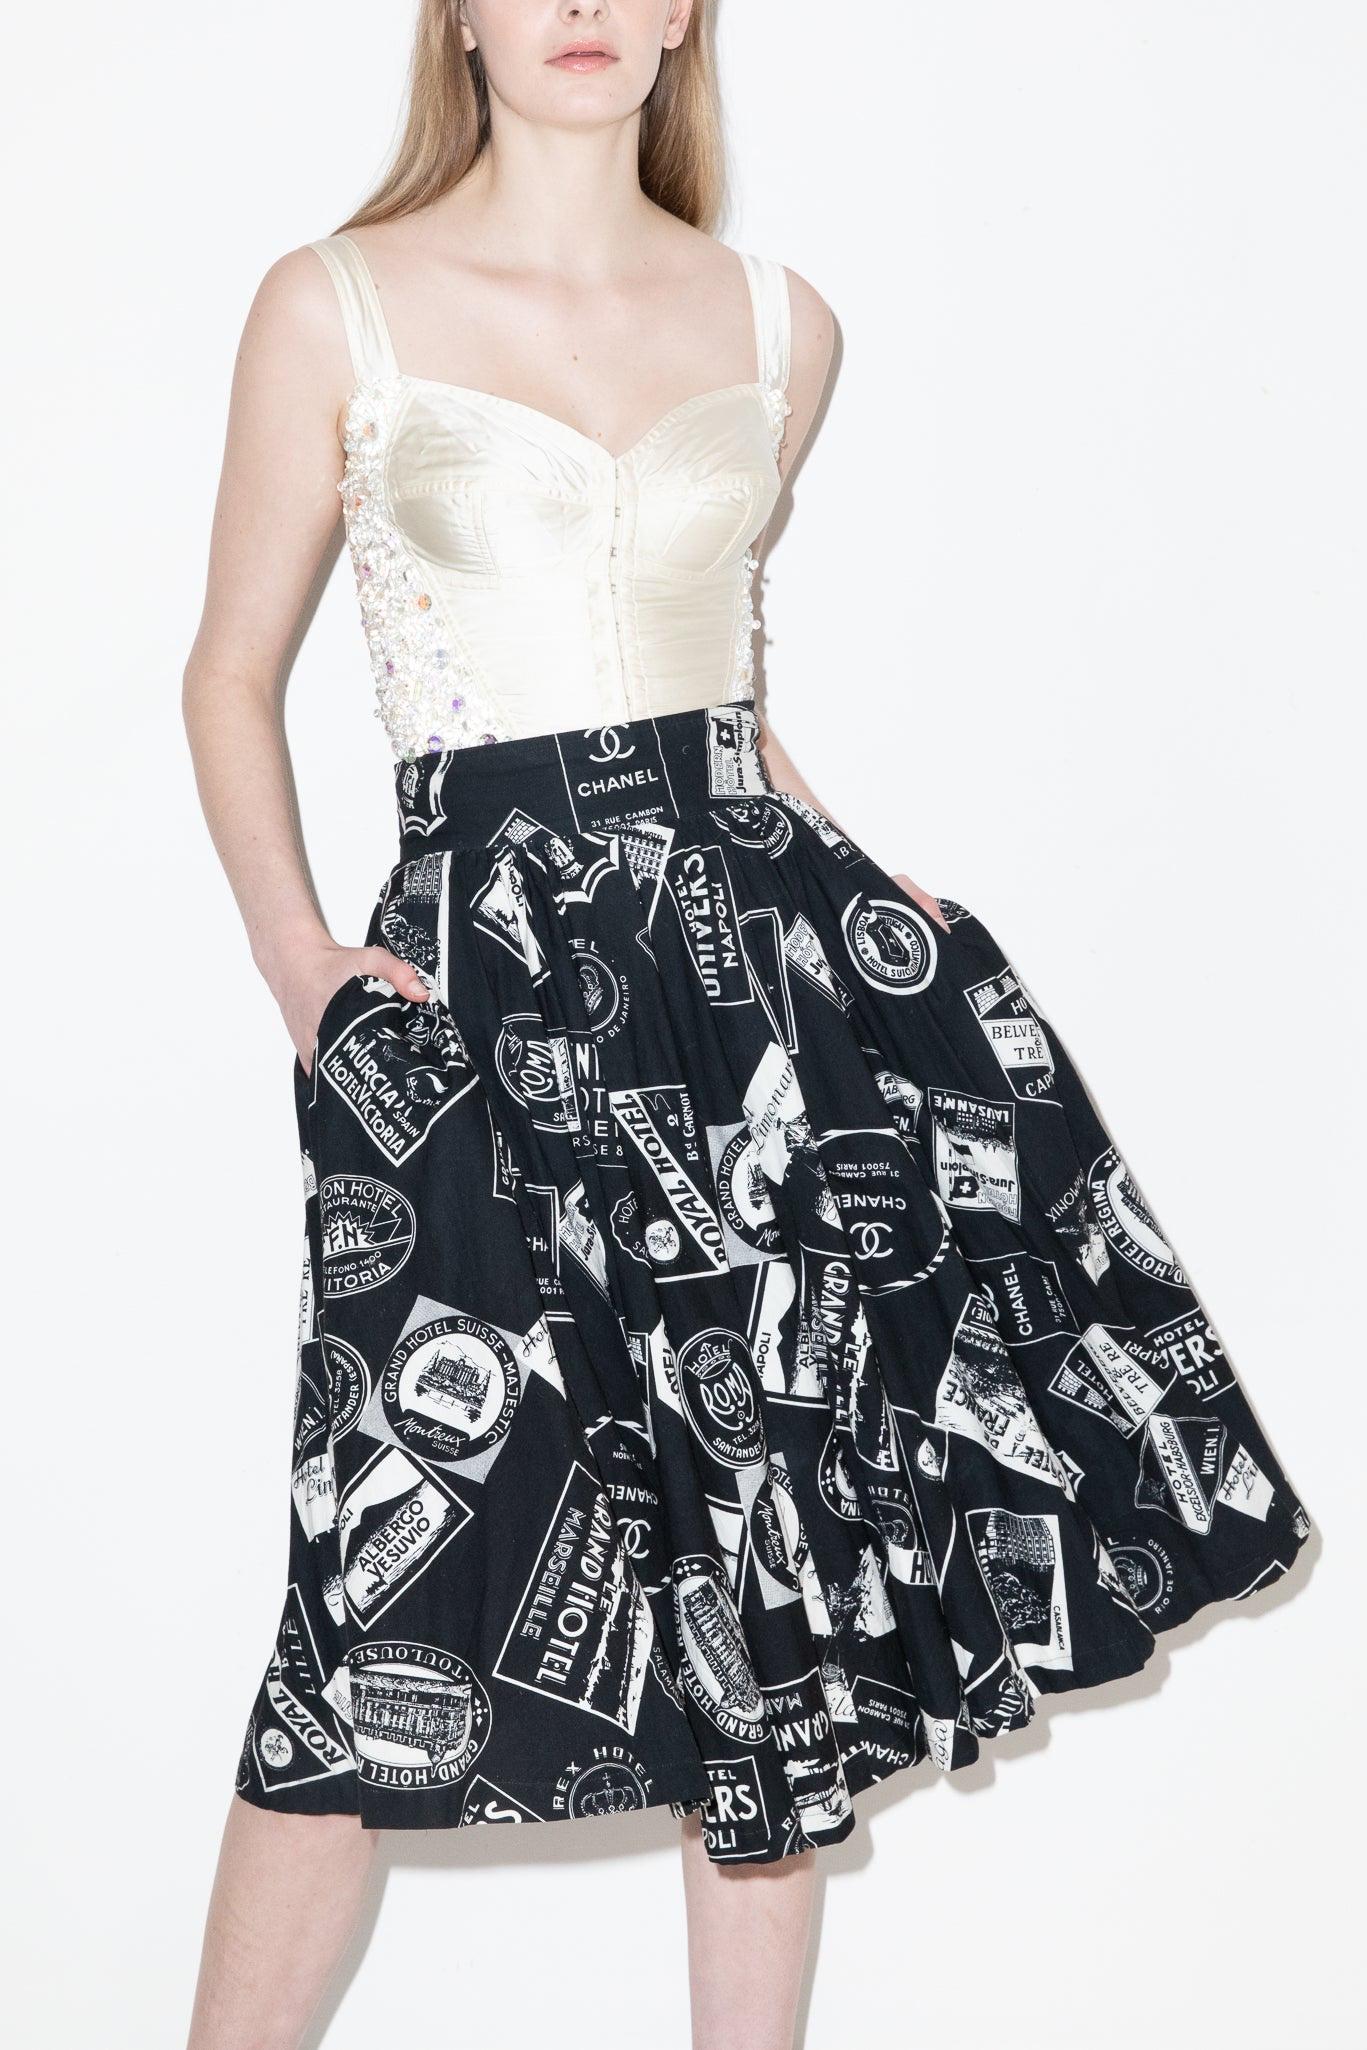 Chanel S/S 1989 Runway Grand Hotel Print Full Skirt In Excellent Condition For Sale In BELLEVUE HILL, NSW